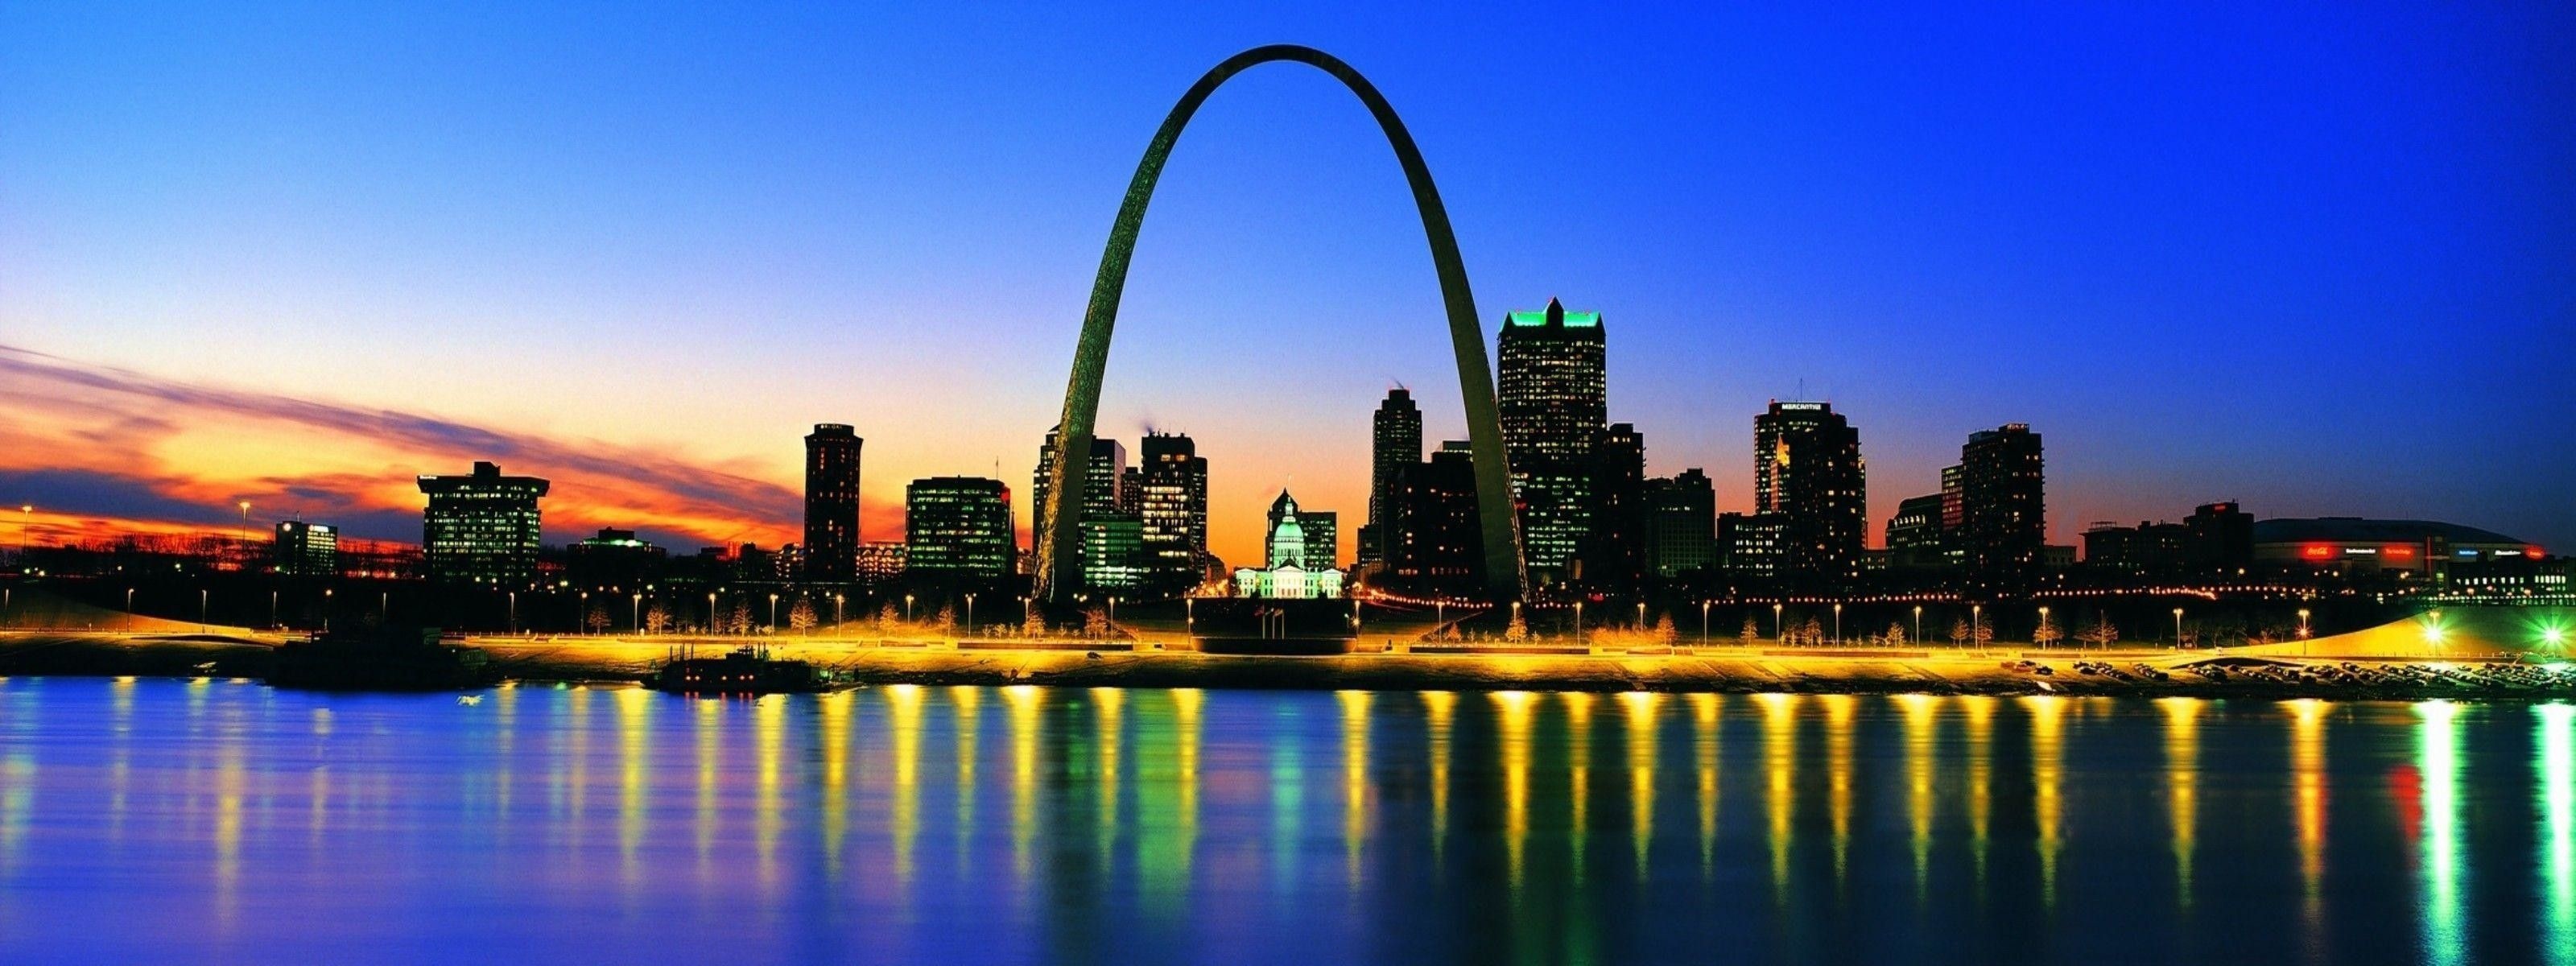 Missouri: St. Louis, The 19th-most populous state of the United States. 3200x1200 Dual Screen Background.